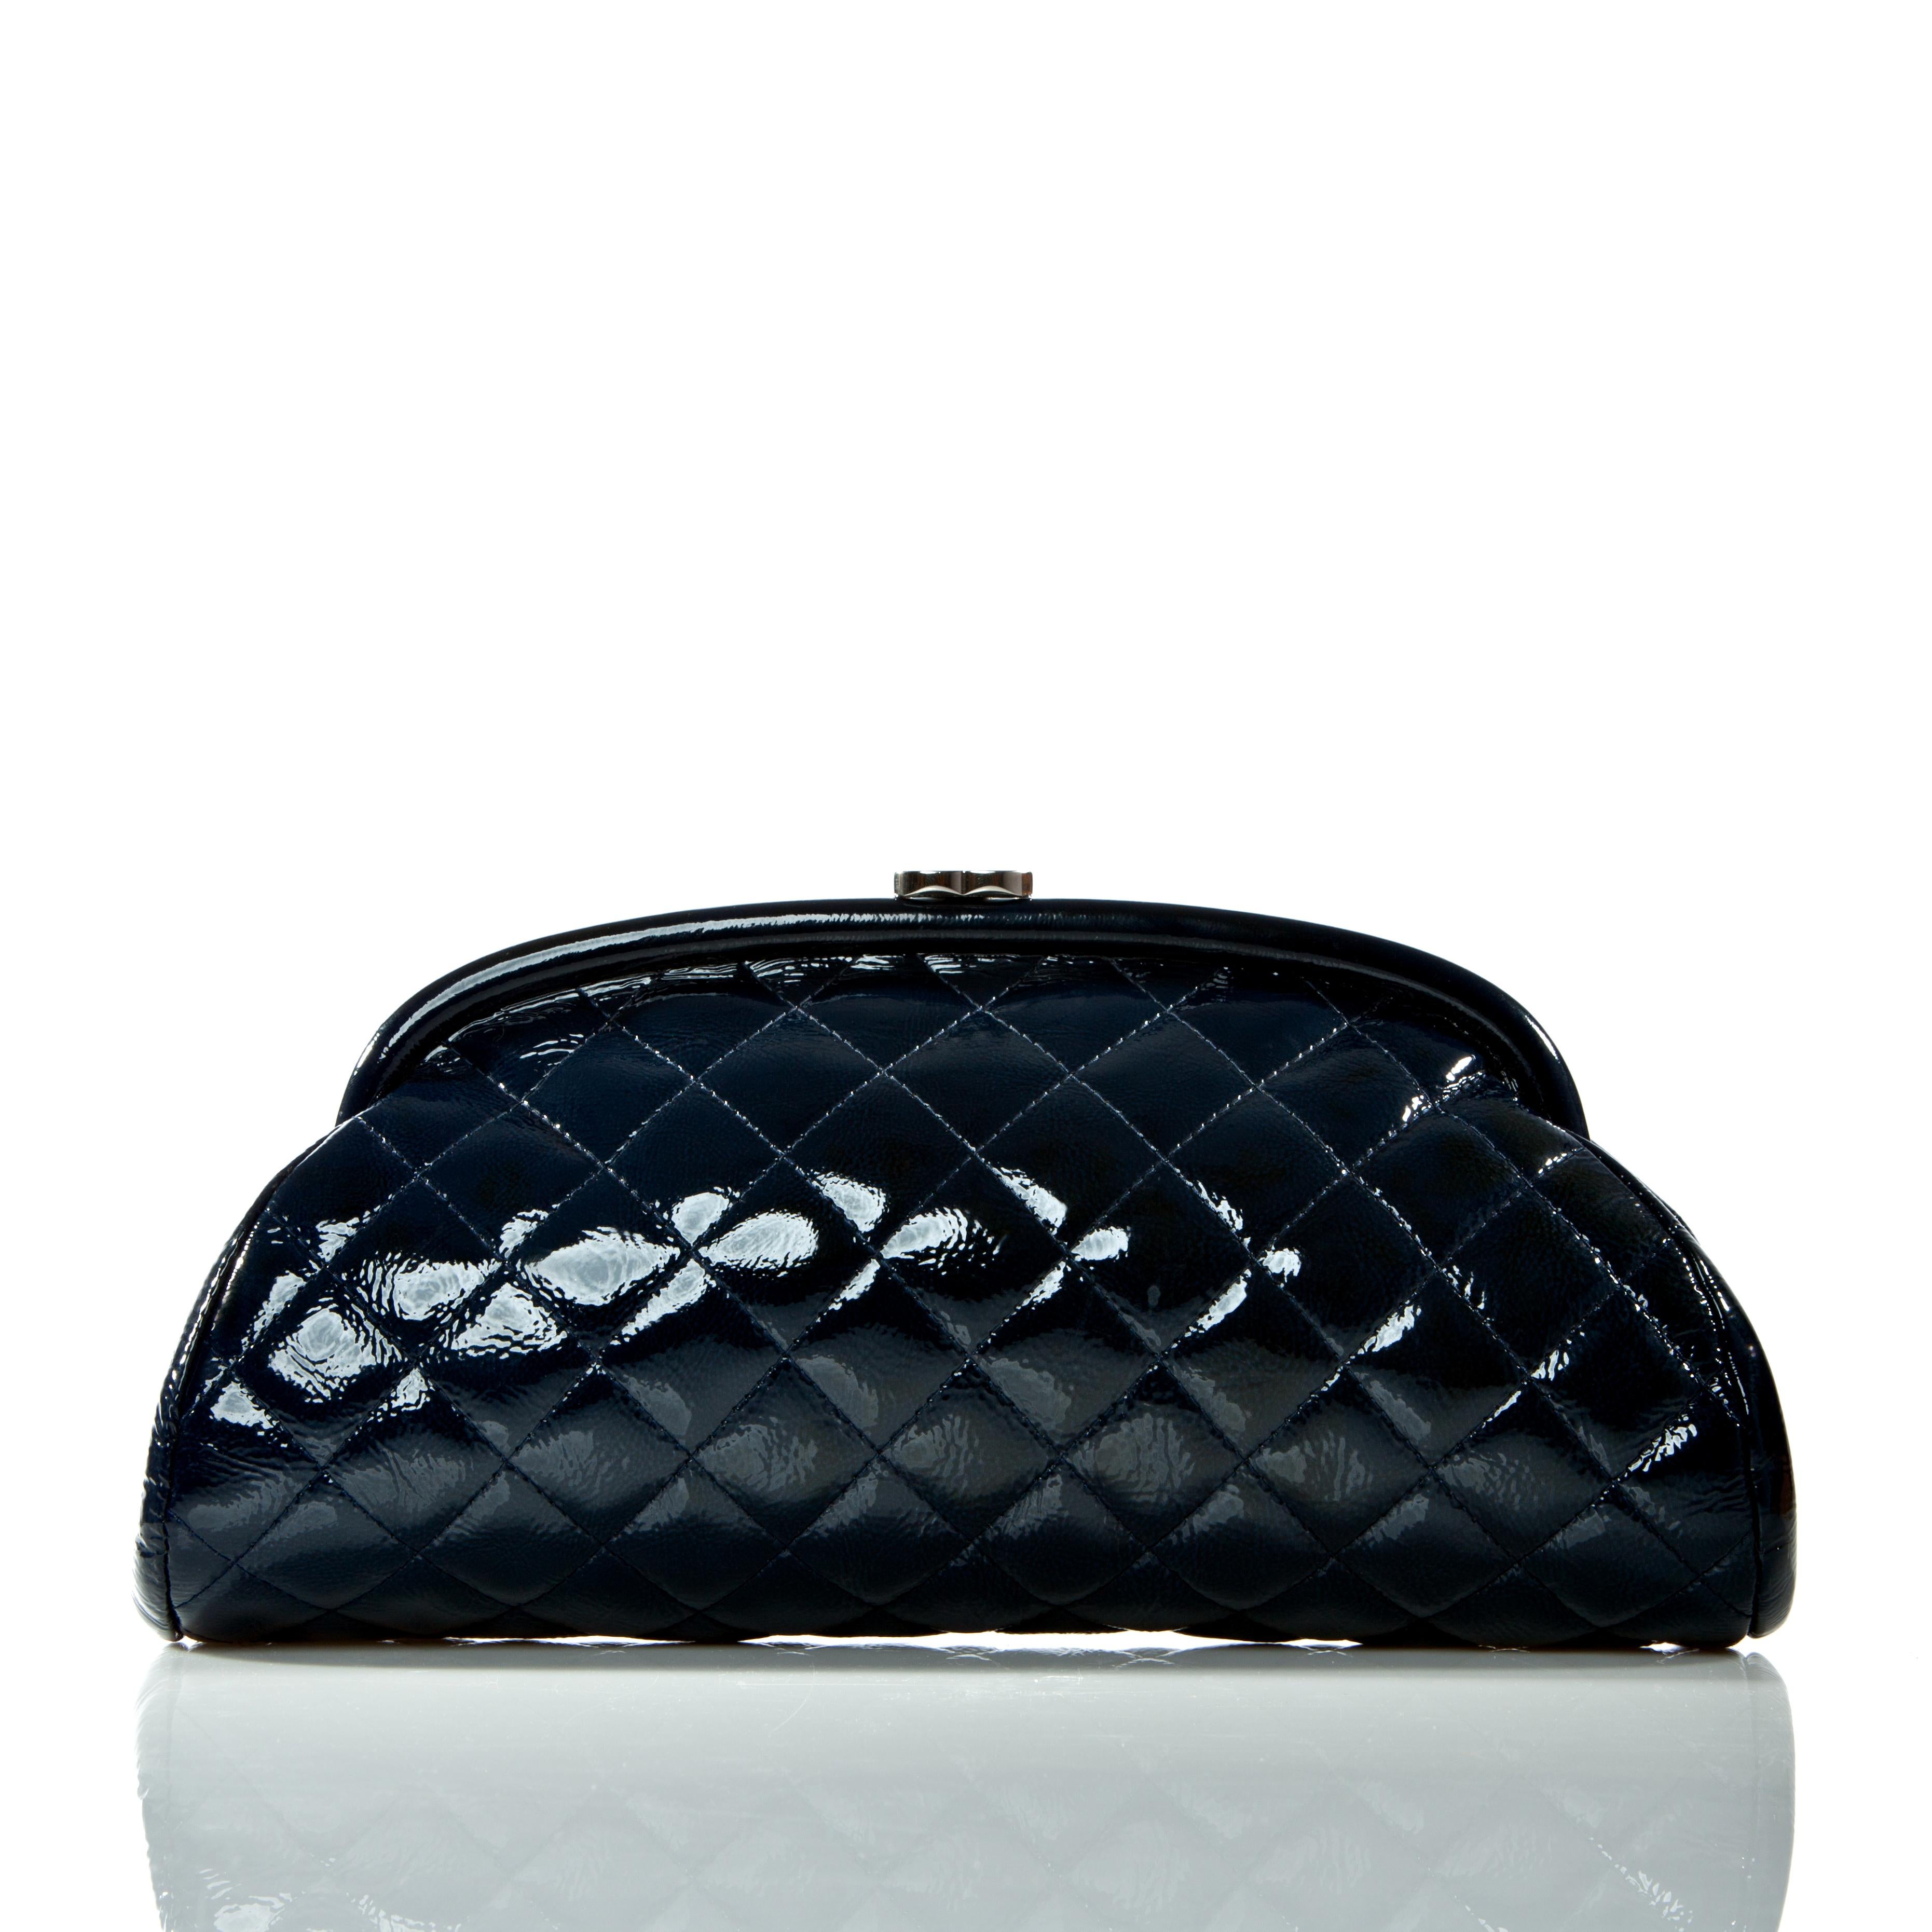 Black Chanel 2007 Classic Vintage Navy Blue Patent Diamond Quilted Timeless Clutch Bag For Sale